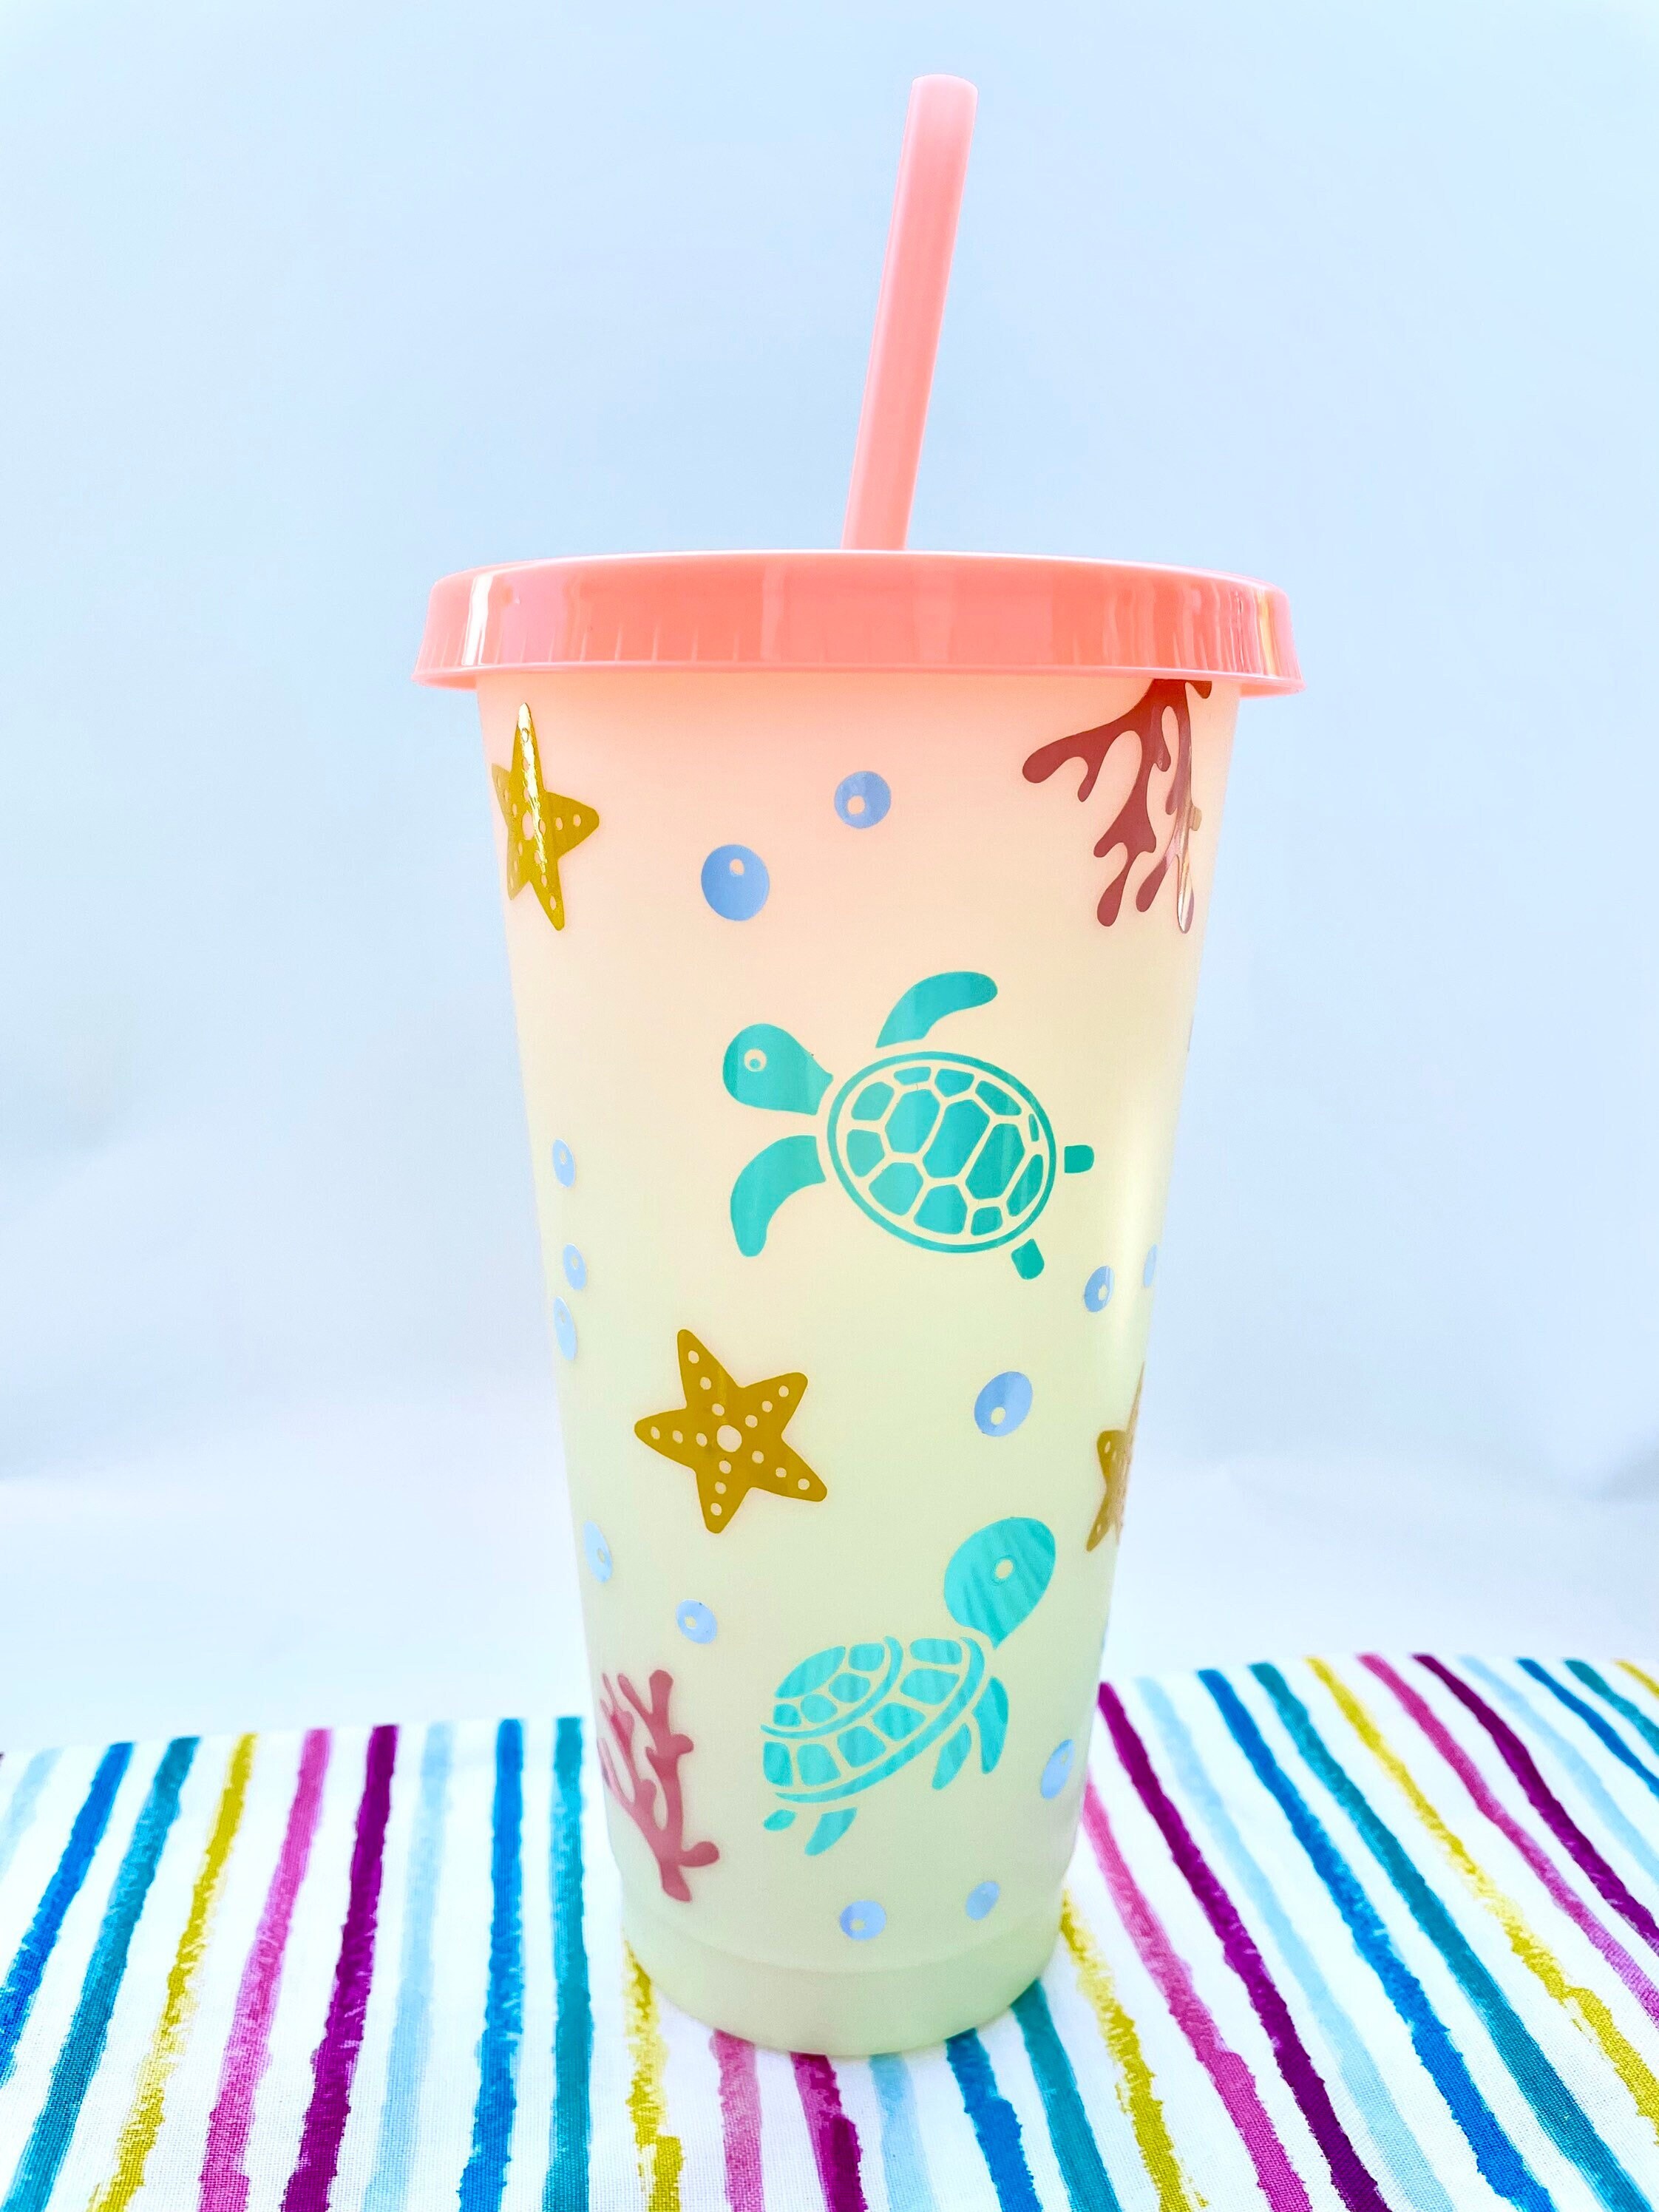 Tervis Straight Straws, Frosted, 10 Inches - 6 straws